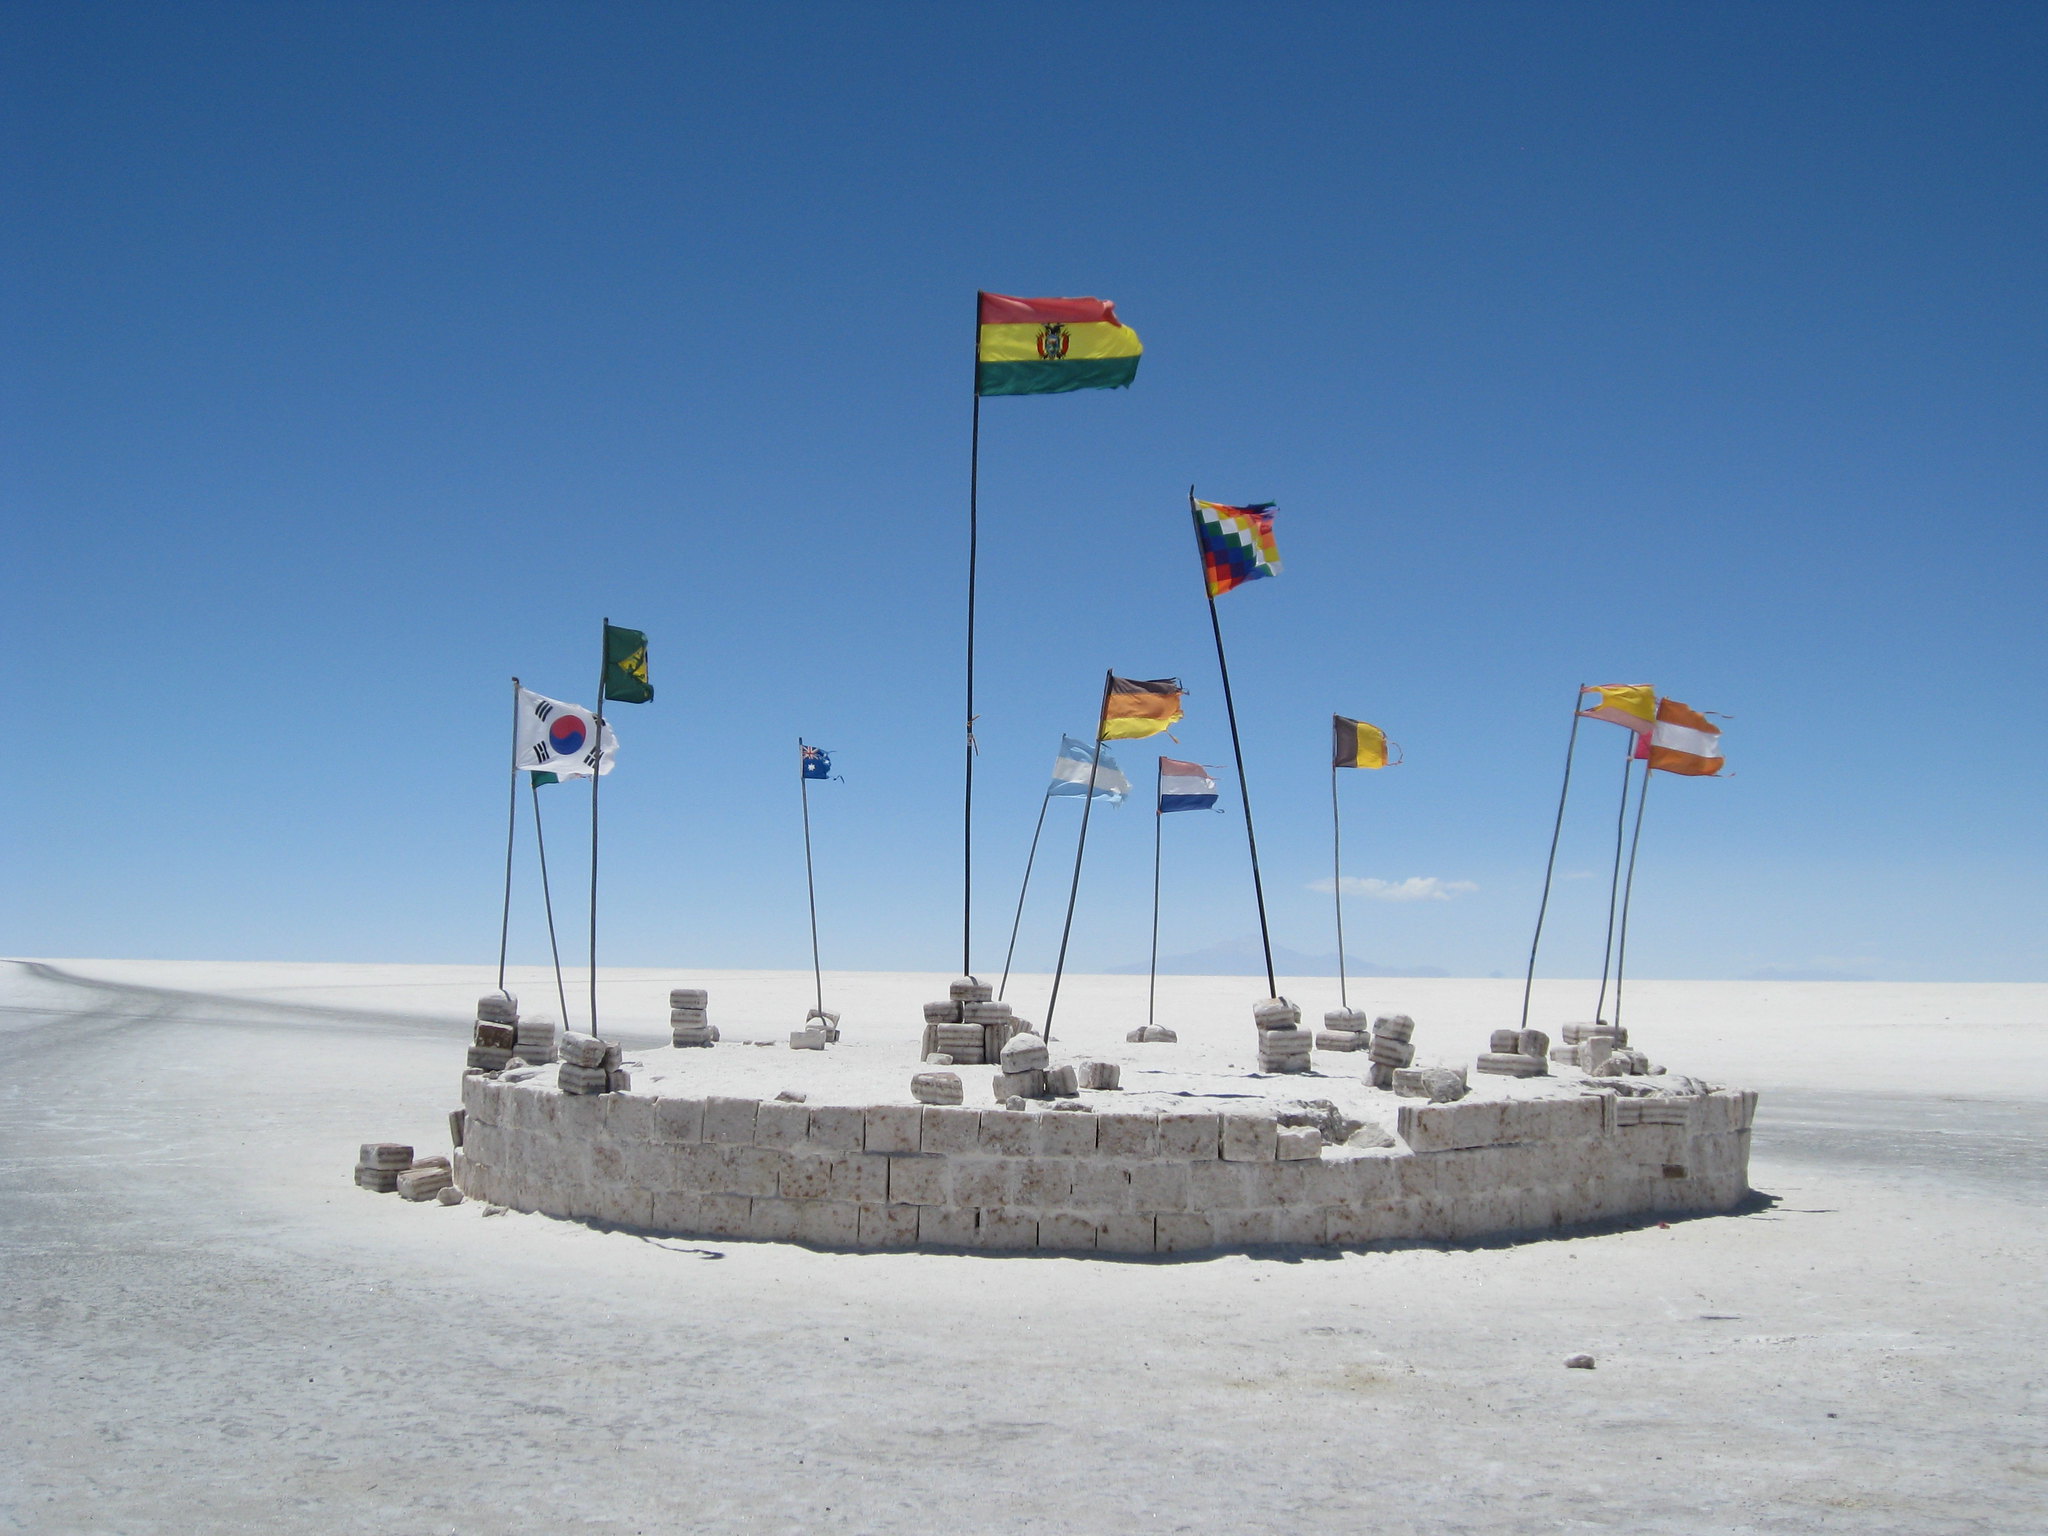 My journey through Bolivia - Myths dispelled and new discoveries @BolTurOficial